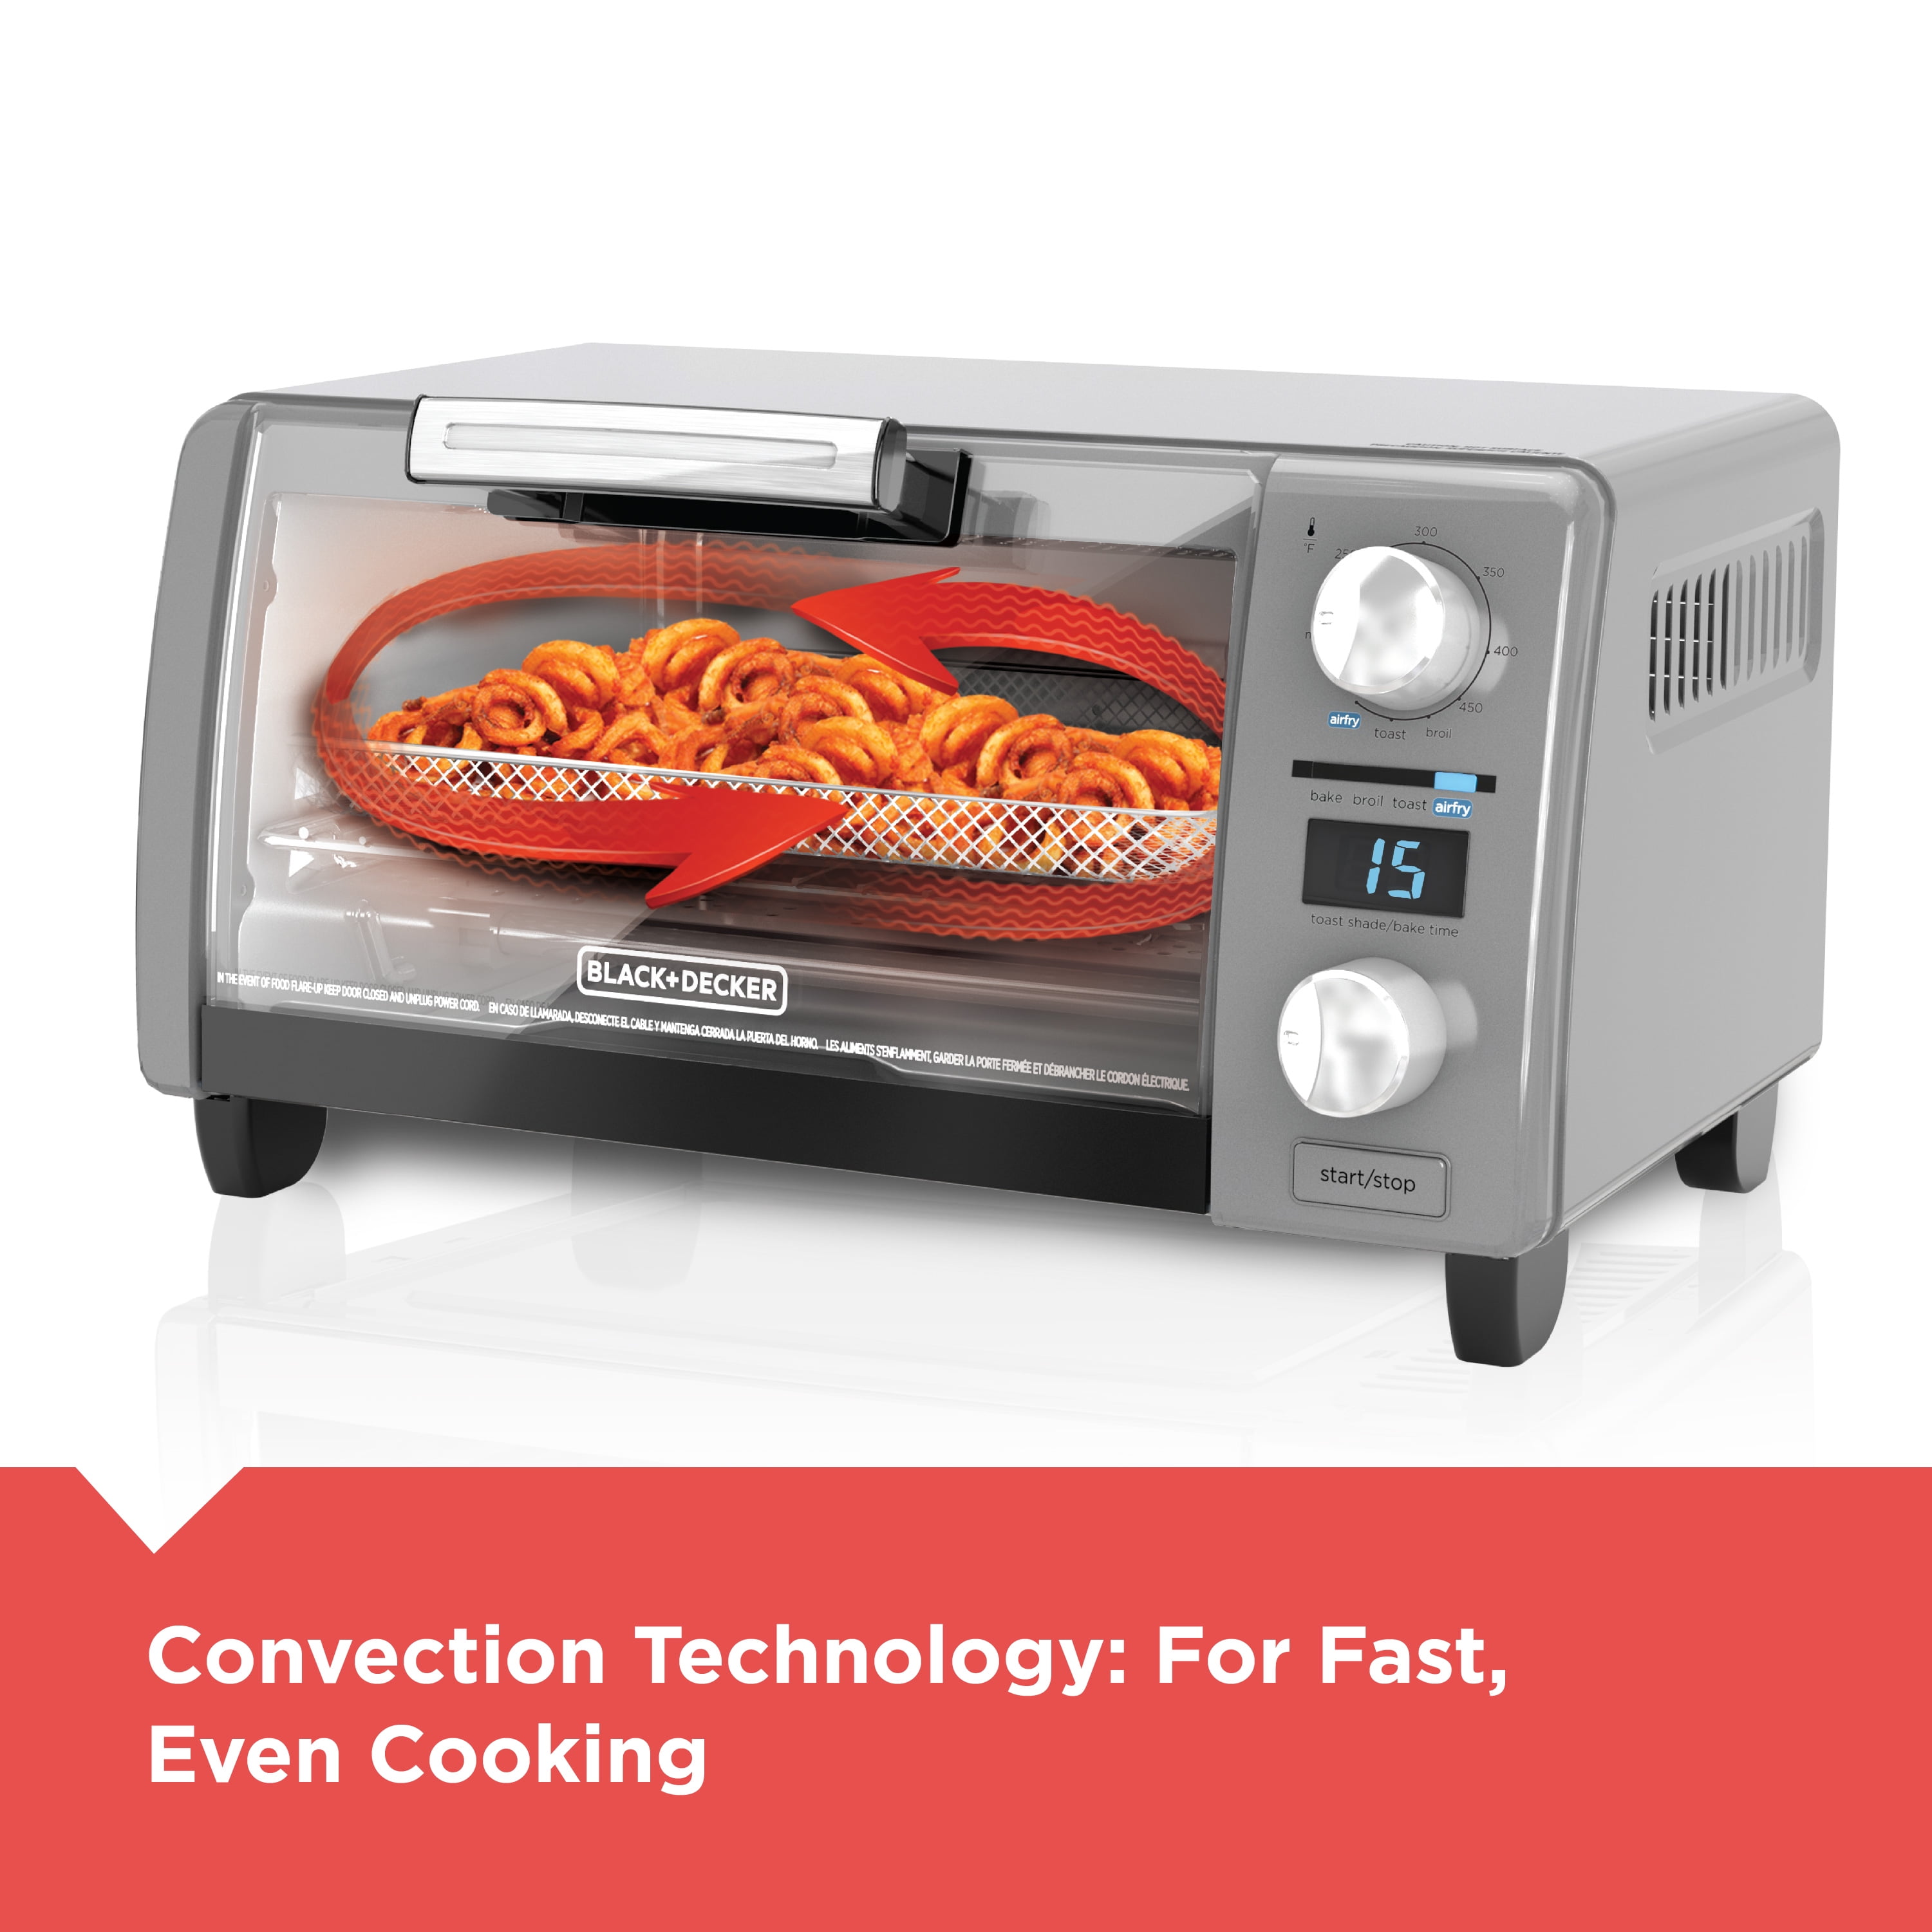 Crisp N Bake™ Air Fry Toaster Oven with Rotisserie, TO4315SSQ